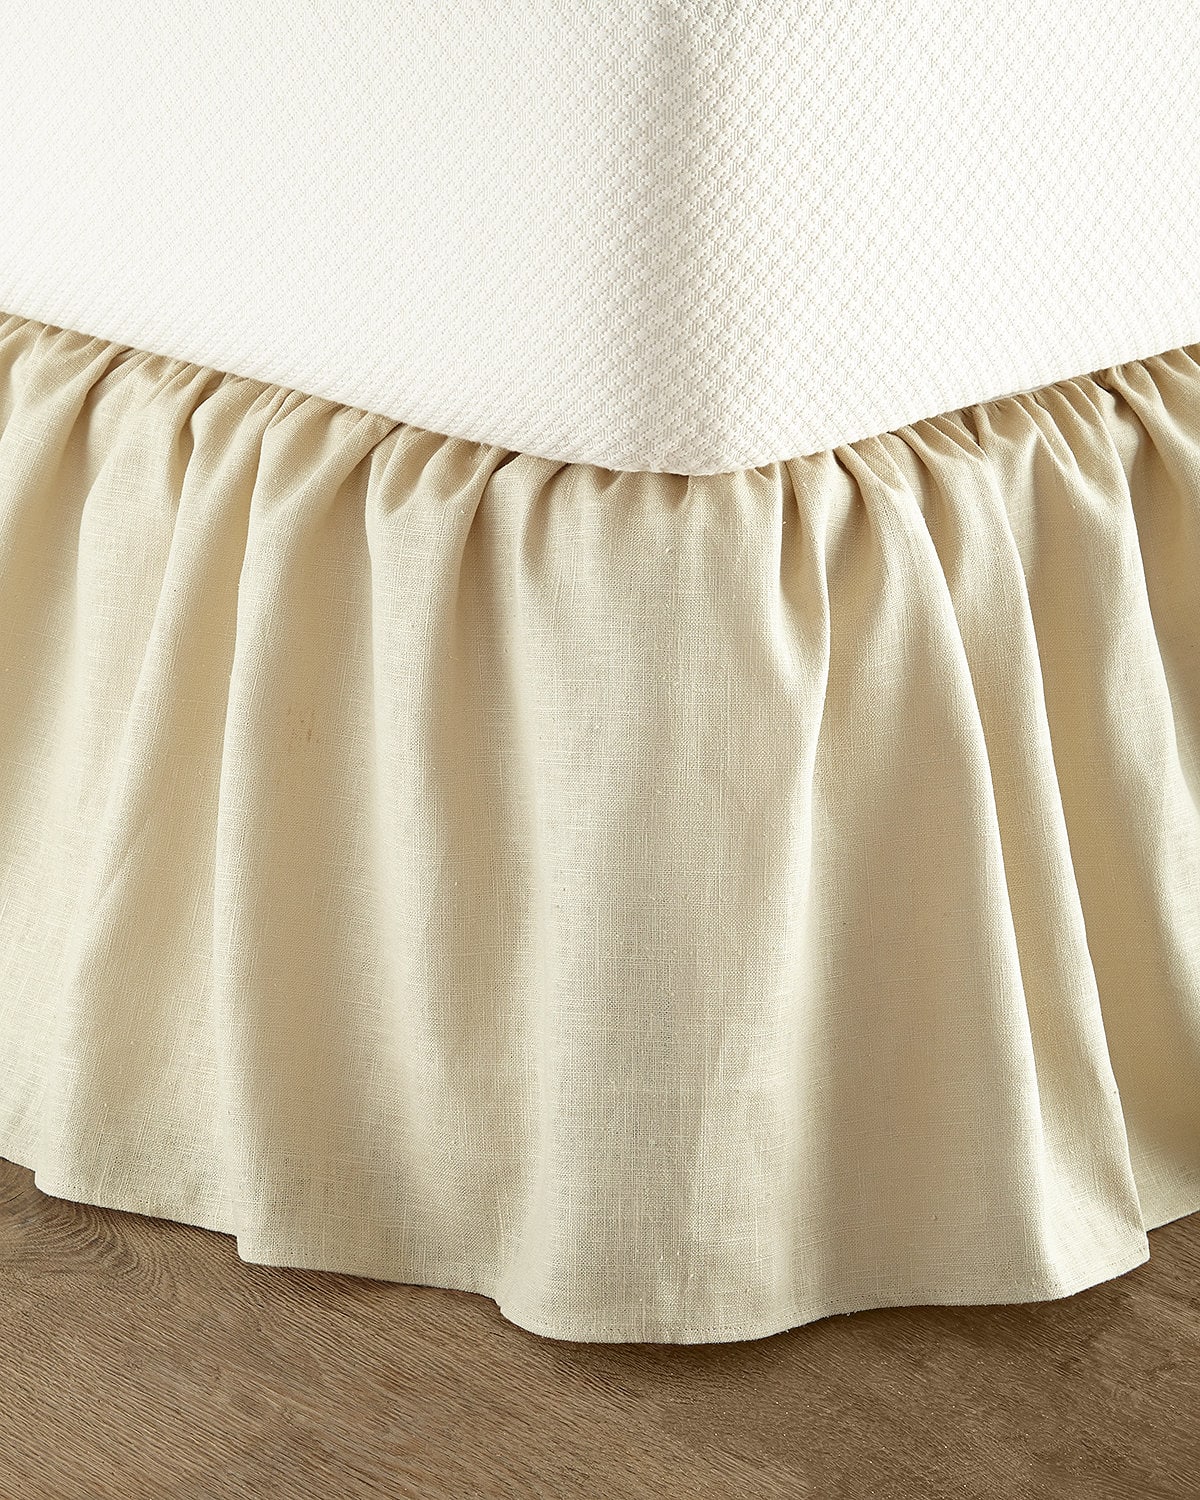 Sherry Kline Home King Monterey Solid-color Dust Skirt In Tan